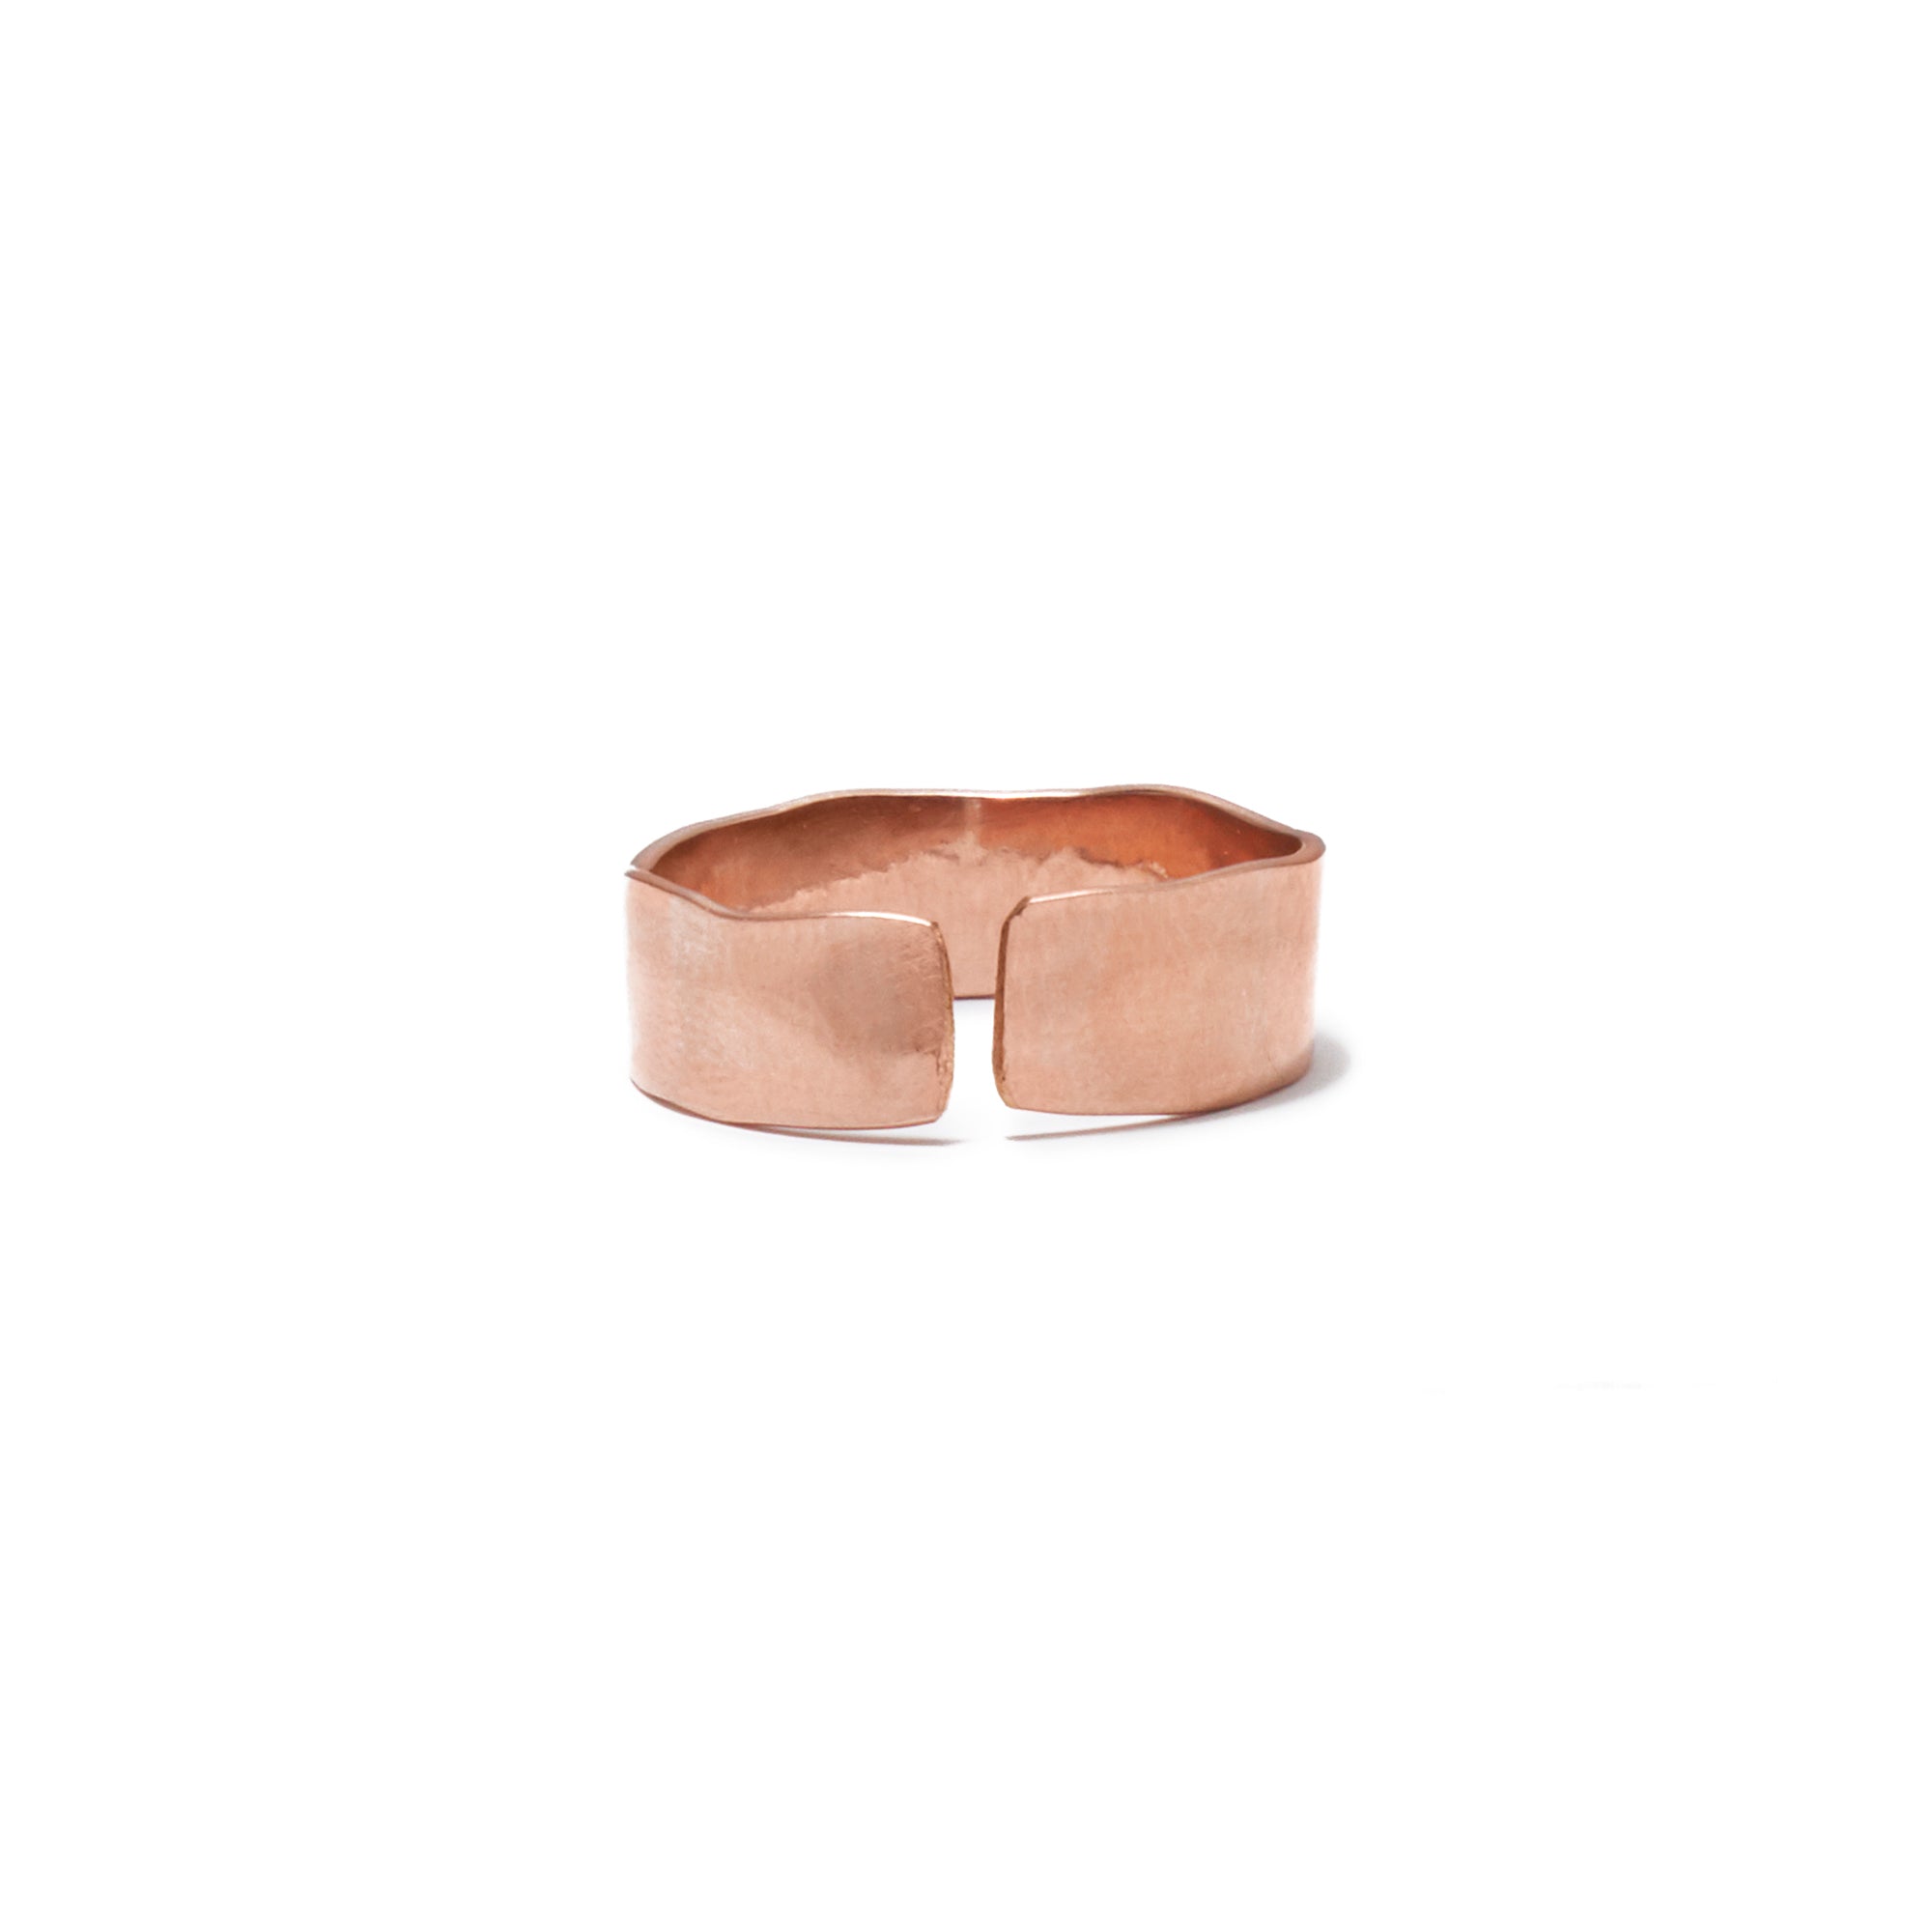 The Mazzo Ring, part of the Sorda Collection, has an open front that can be adjusted slightly to fit the desired finger.